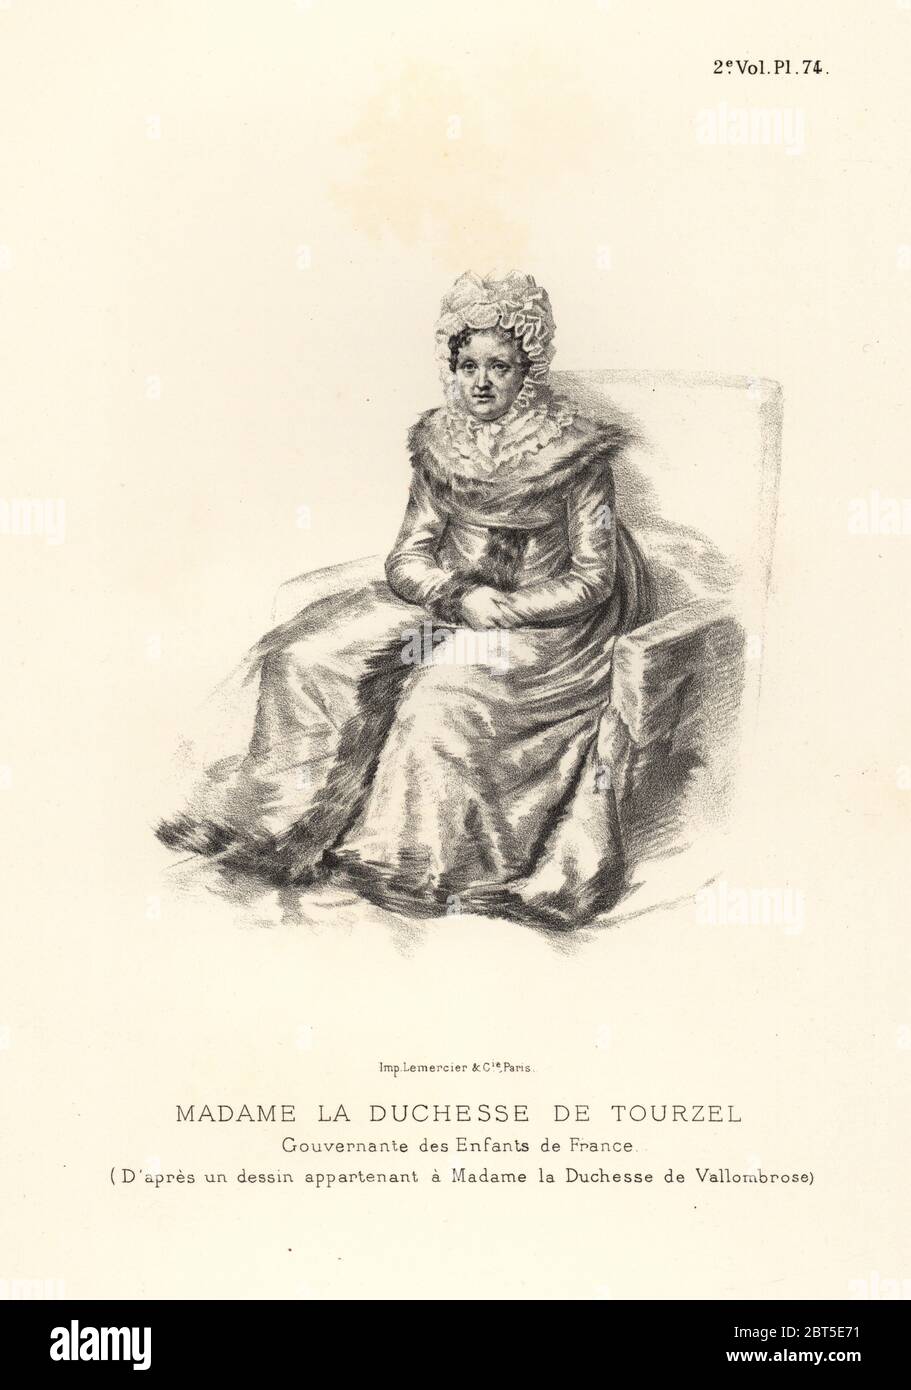 Portrait of the Duchess of Tourzel, governess to Marie Antoinettes children. Louise-Elisabeth de Croy d'Havre, Madame la Duchesse de Tourzel. Lithograph after a portrait attributed to the Duchesse de Vallombrose from Fashions and Customs of Marie Antoinette and her Times, by Le Comte de Reiset, Paris, 1885. The journal of Madame Eloffe, dressmaker and linen-merchant to the Queen and ladies of the court. Stock Photo